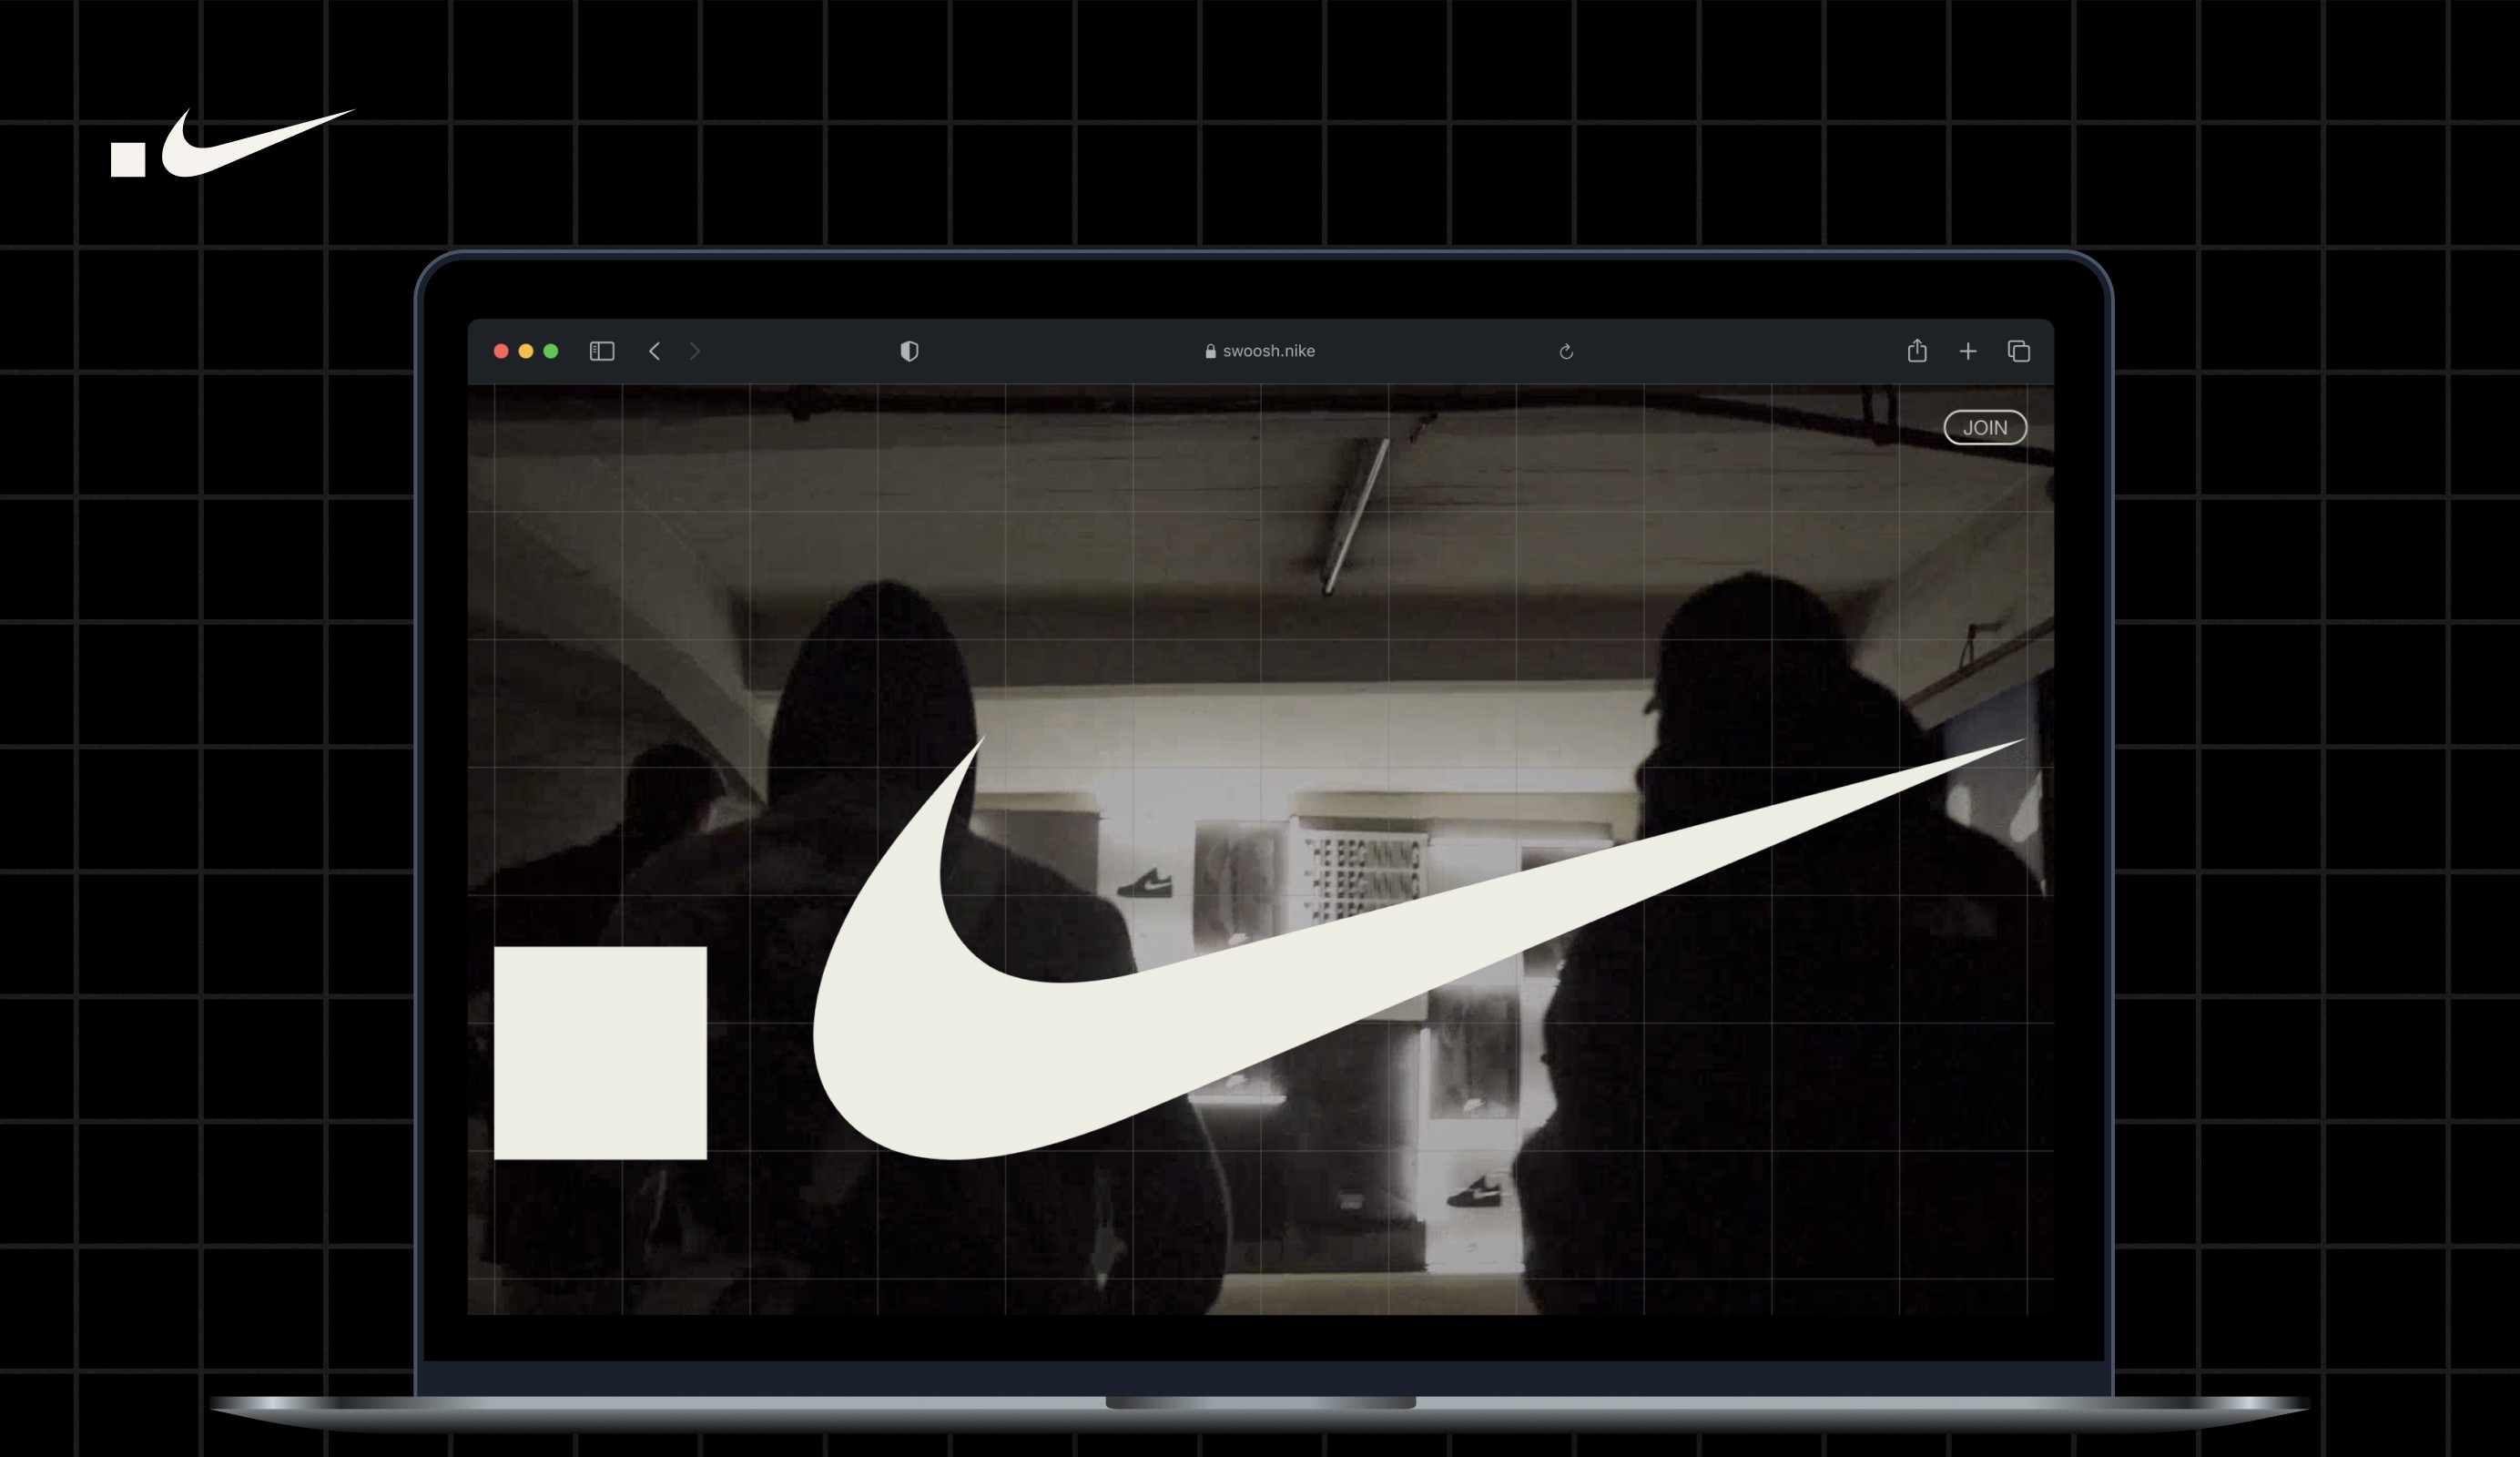 Nike logo with text overlay, Nike, fashion, Off White HD wallpaper